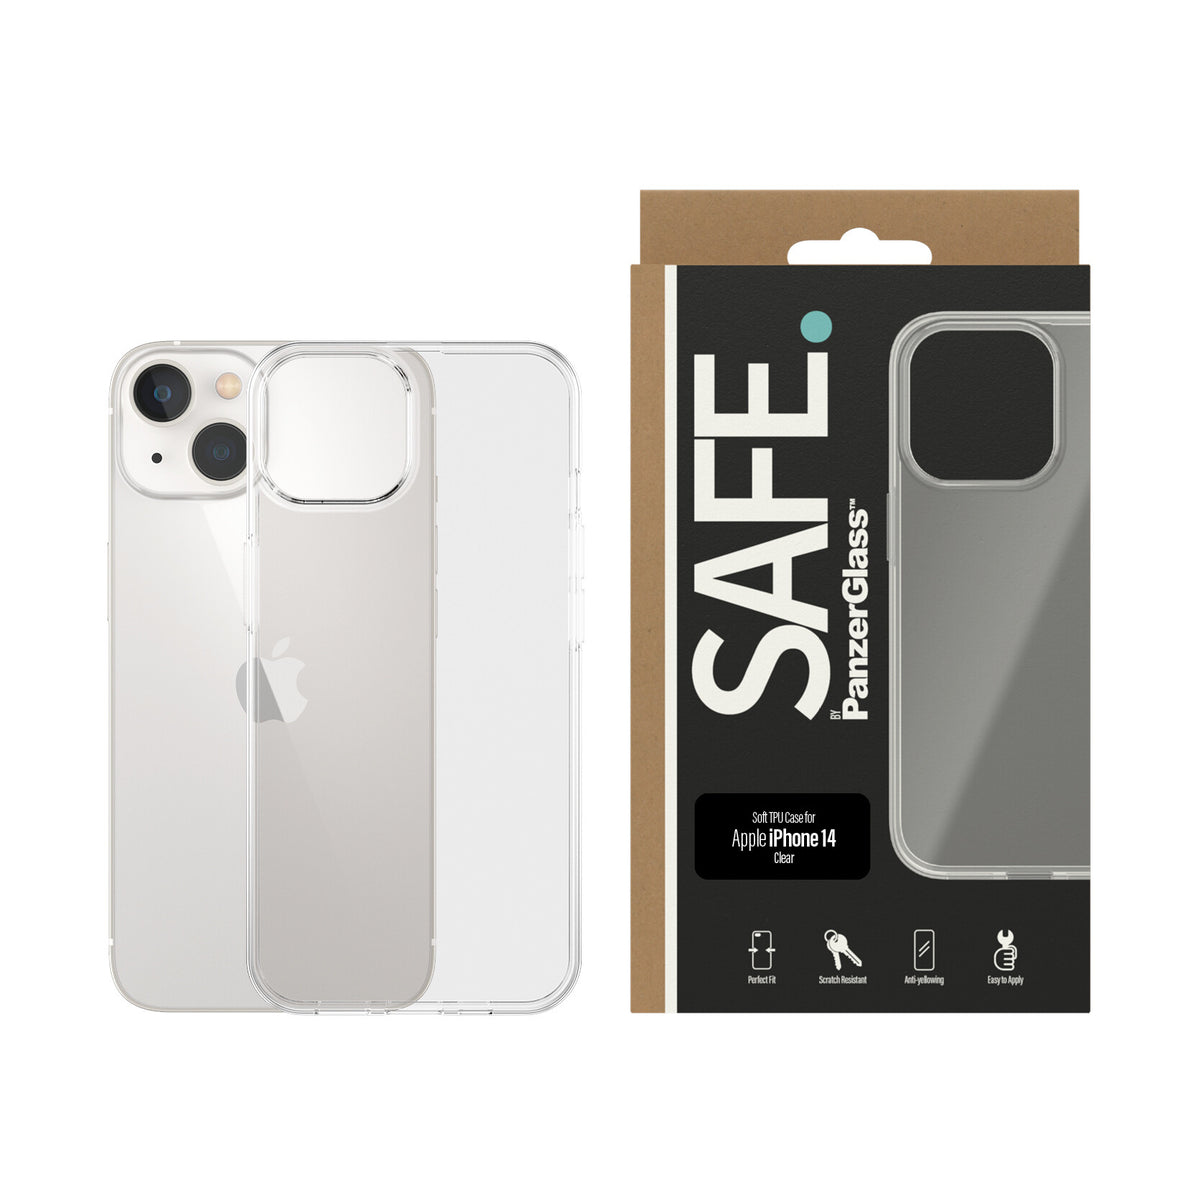 PanzerGlass SAFE. mobile phone case for iPhone 14 / 13 in Transparent